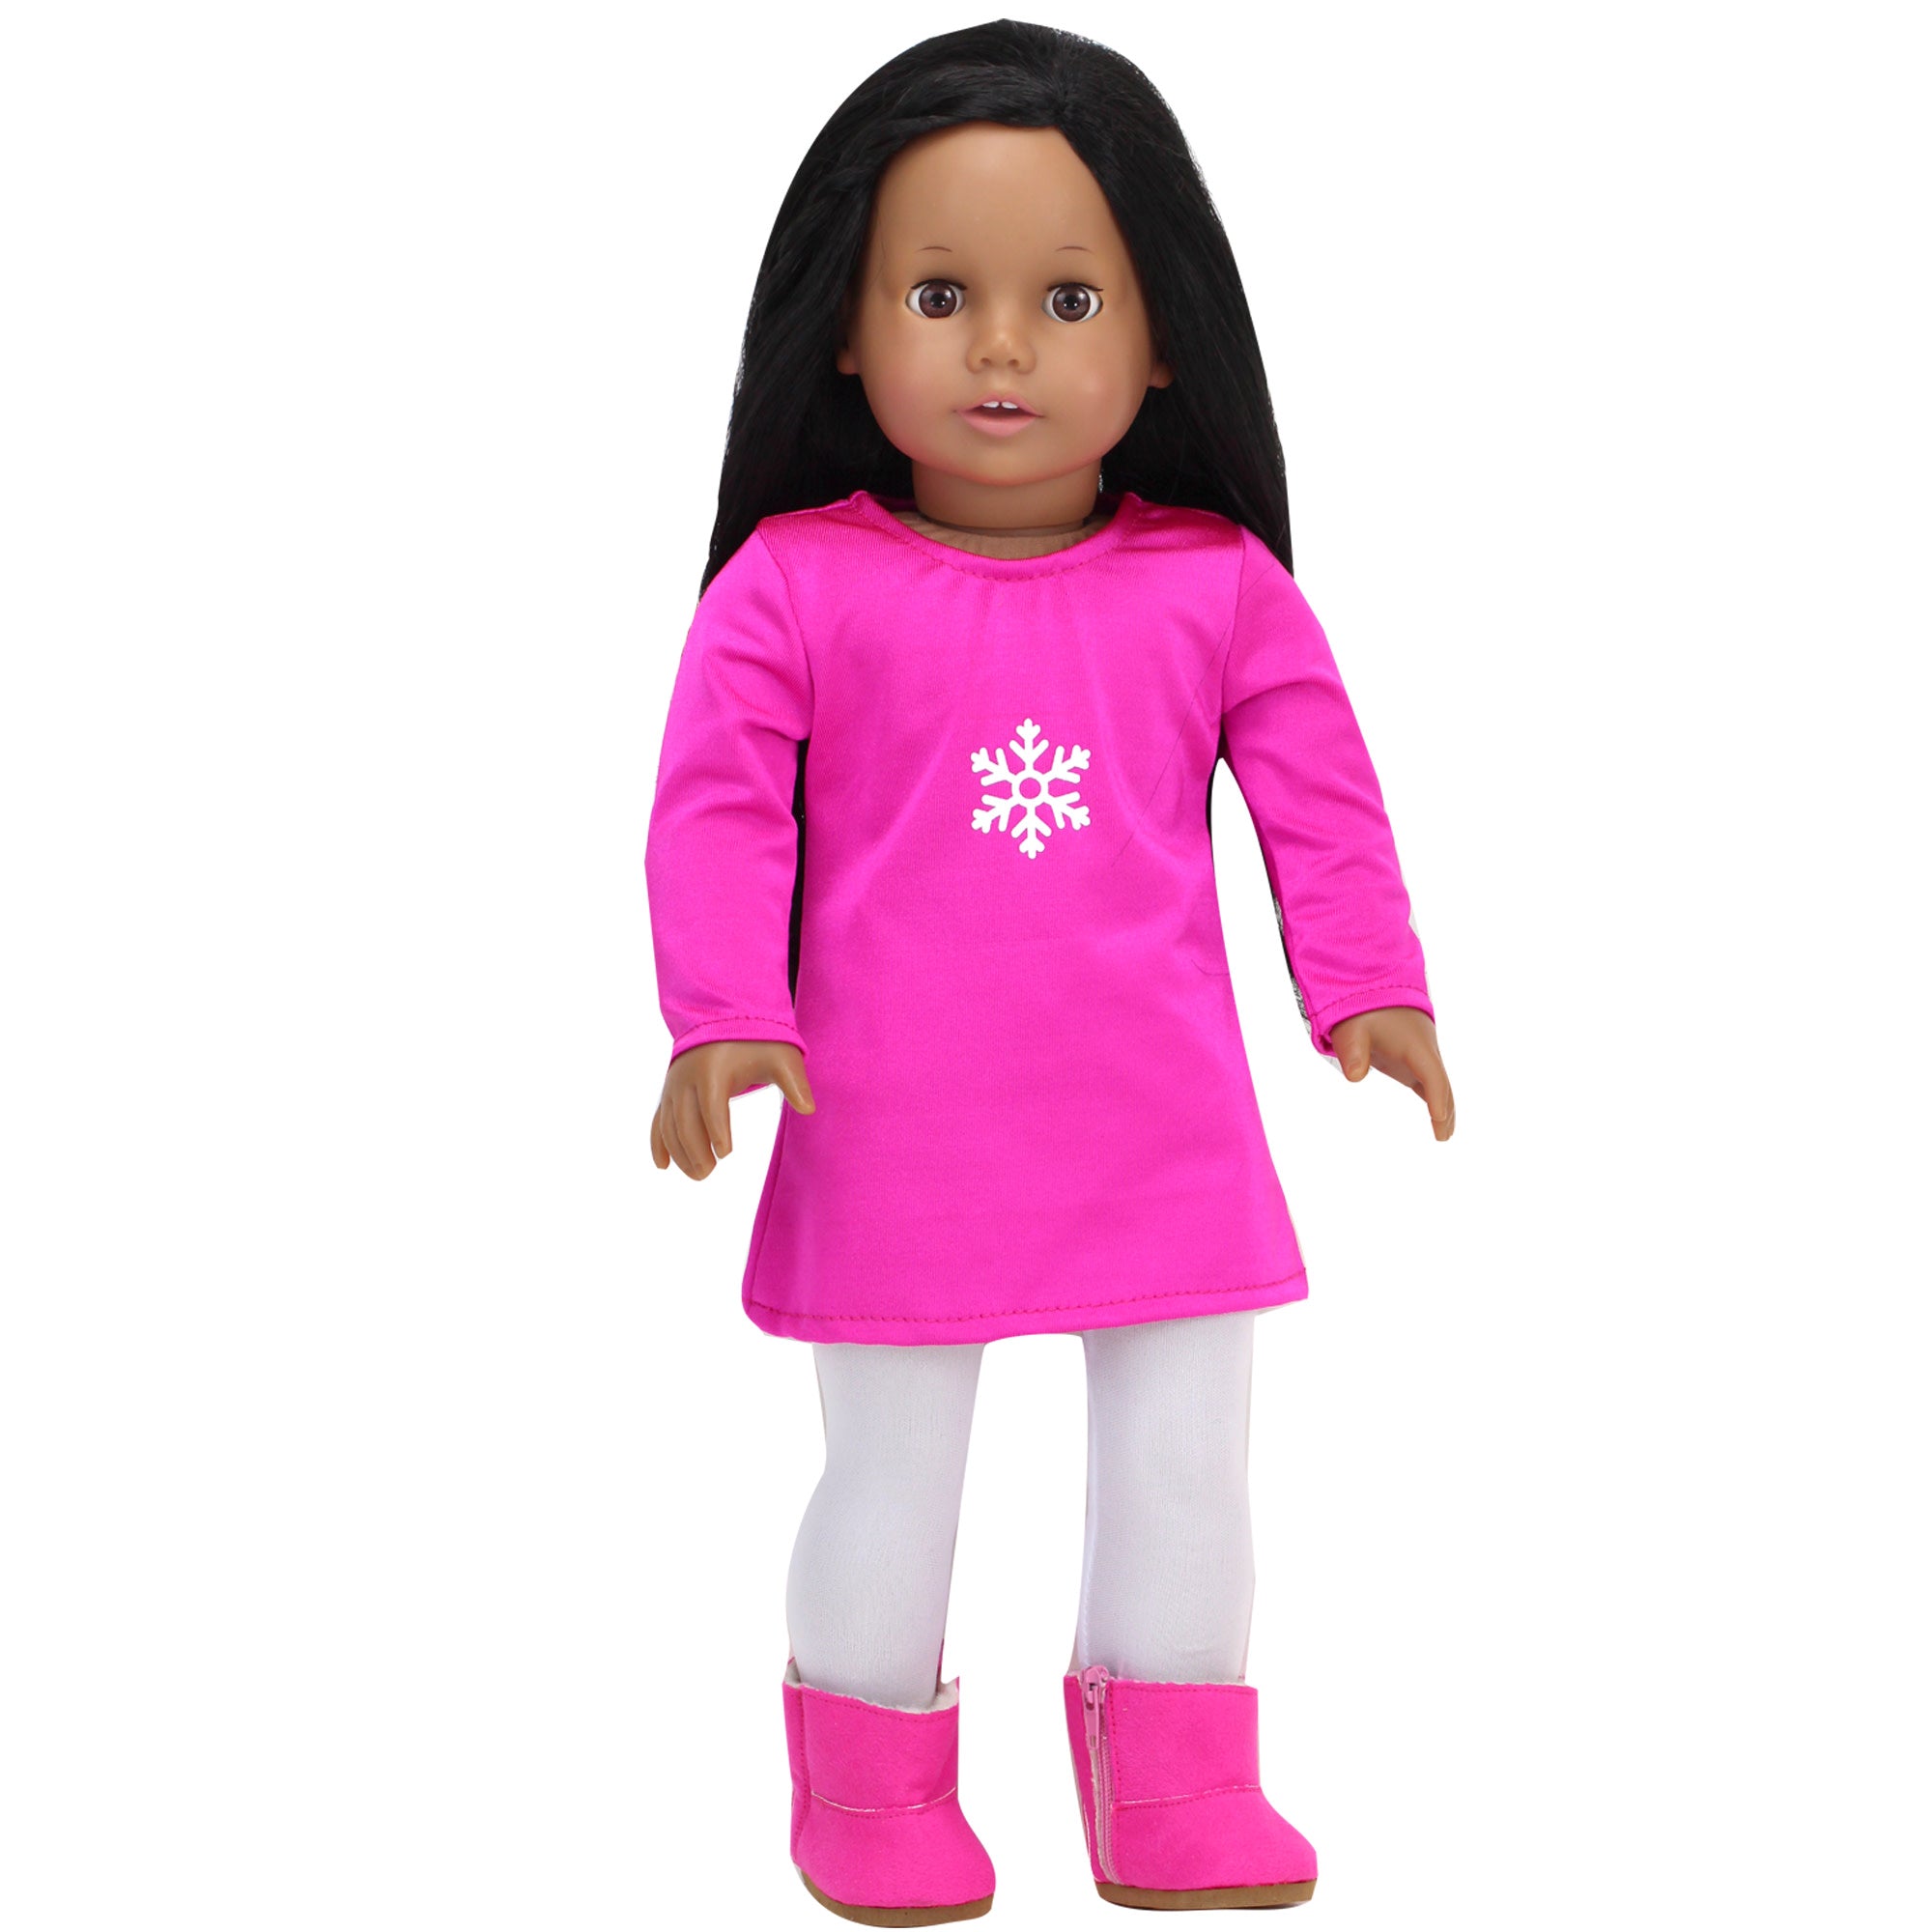 Sophia’s Snowflake T-Shirt Tunic Dress, Shaggy Faux Fur Vest, Solid-Colored Leggings, & Booties Winter Outfit Set for 18” Dolls, Hot Pink/Silver/White